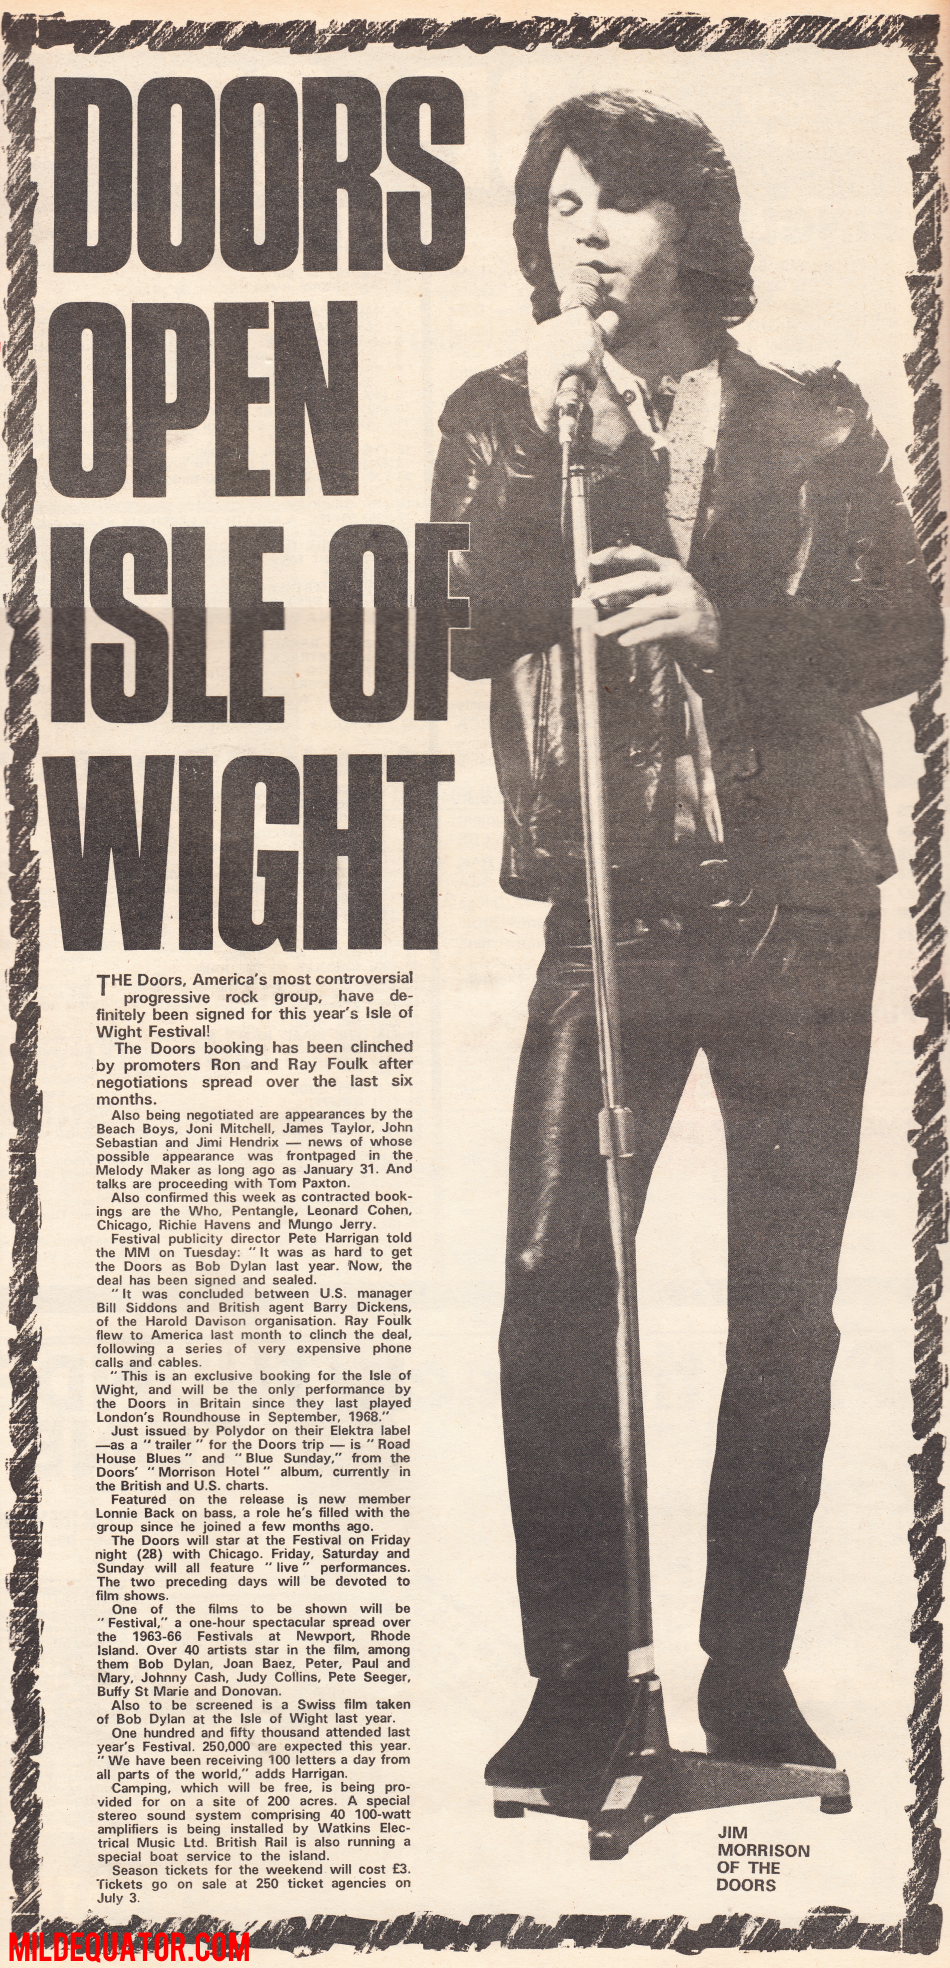 Isle Of Wight - Article